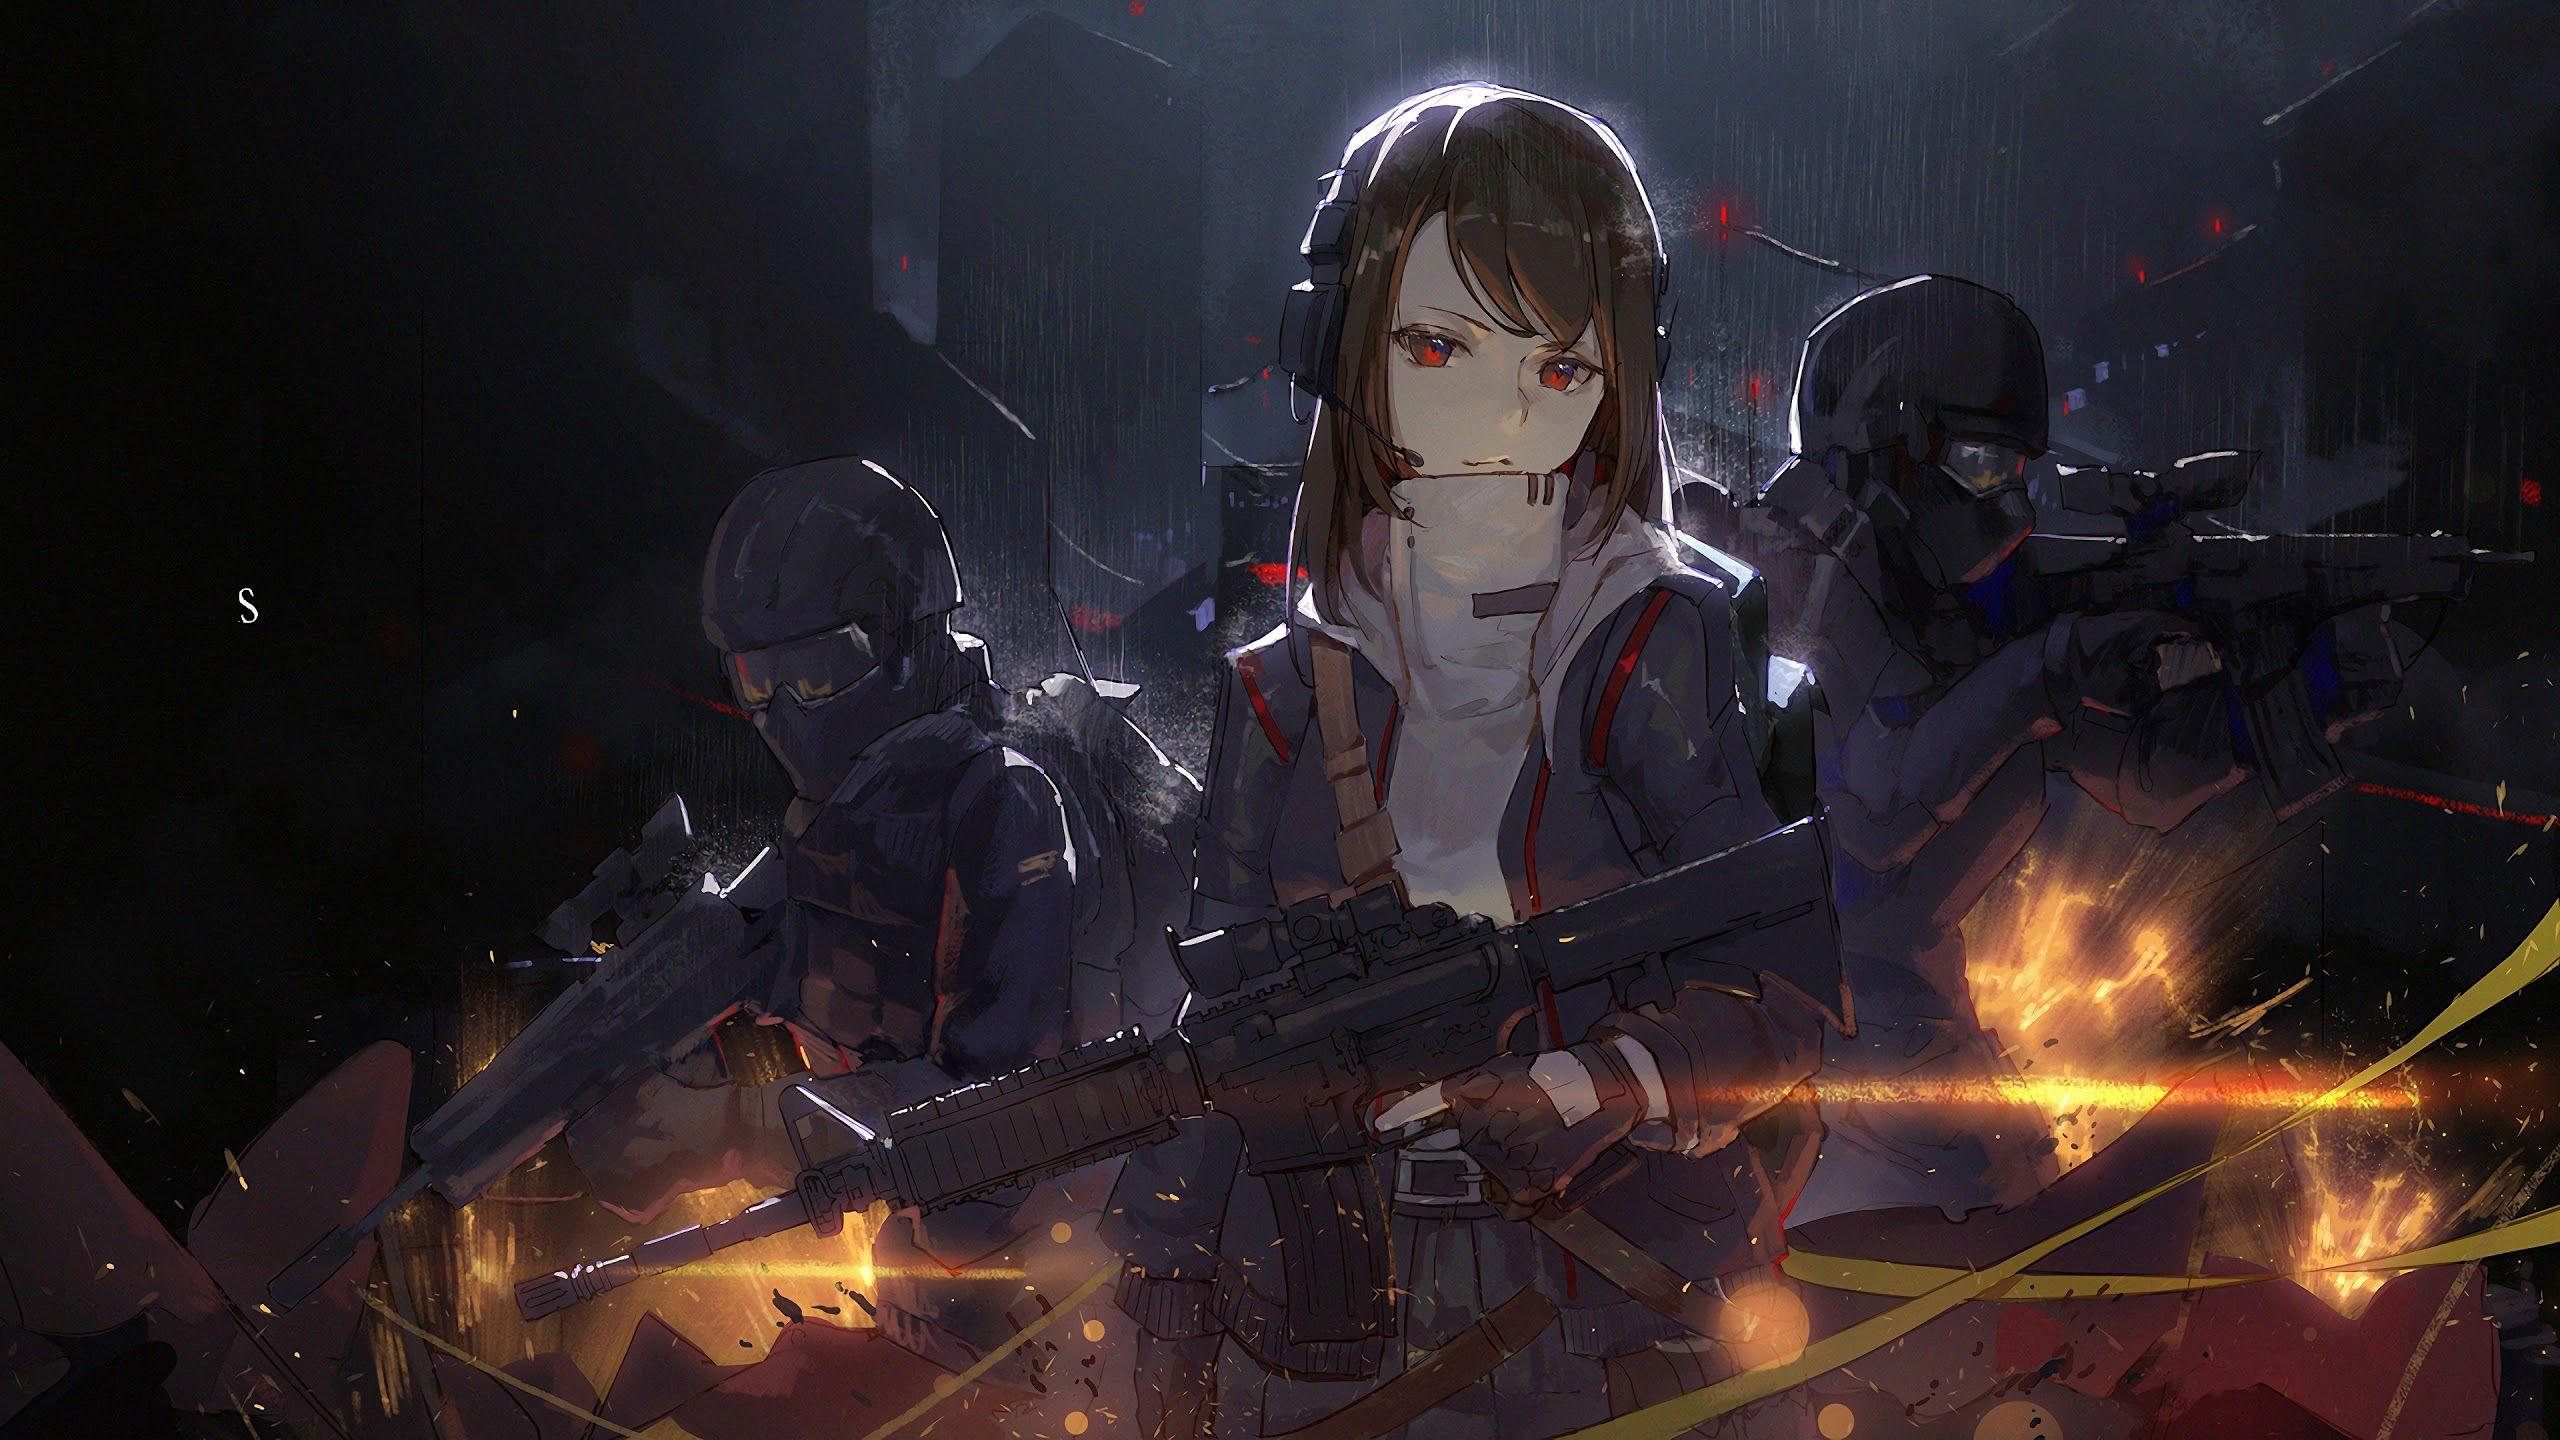 Anime Soldier Wallpaper Free Anime Soldier